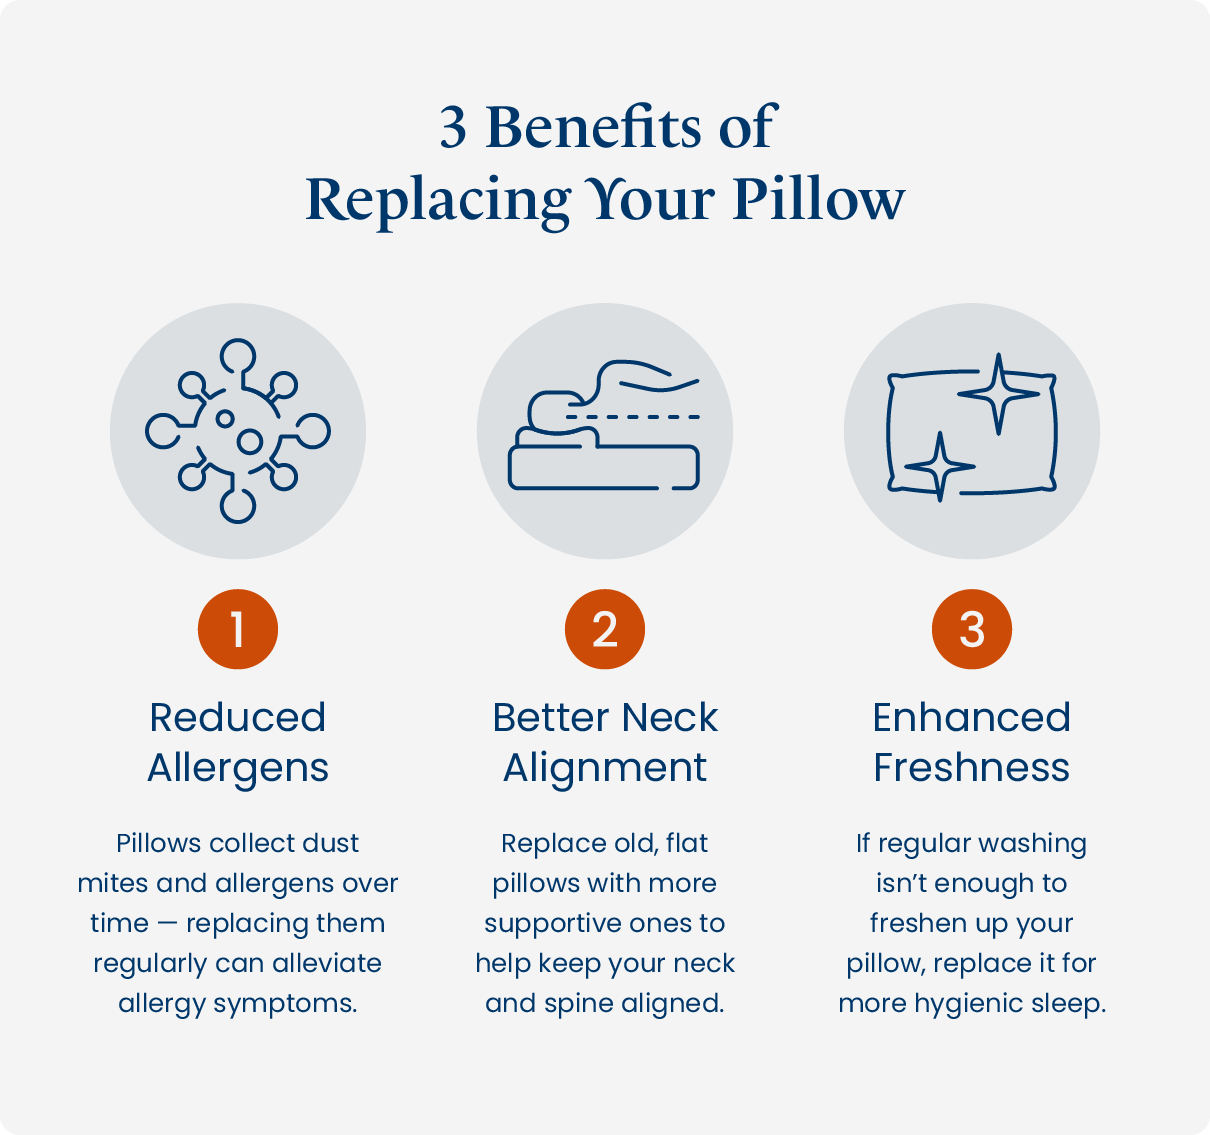 3 benefits of replacing your pillow.